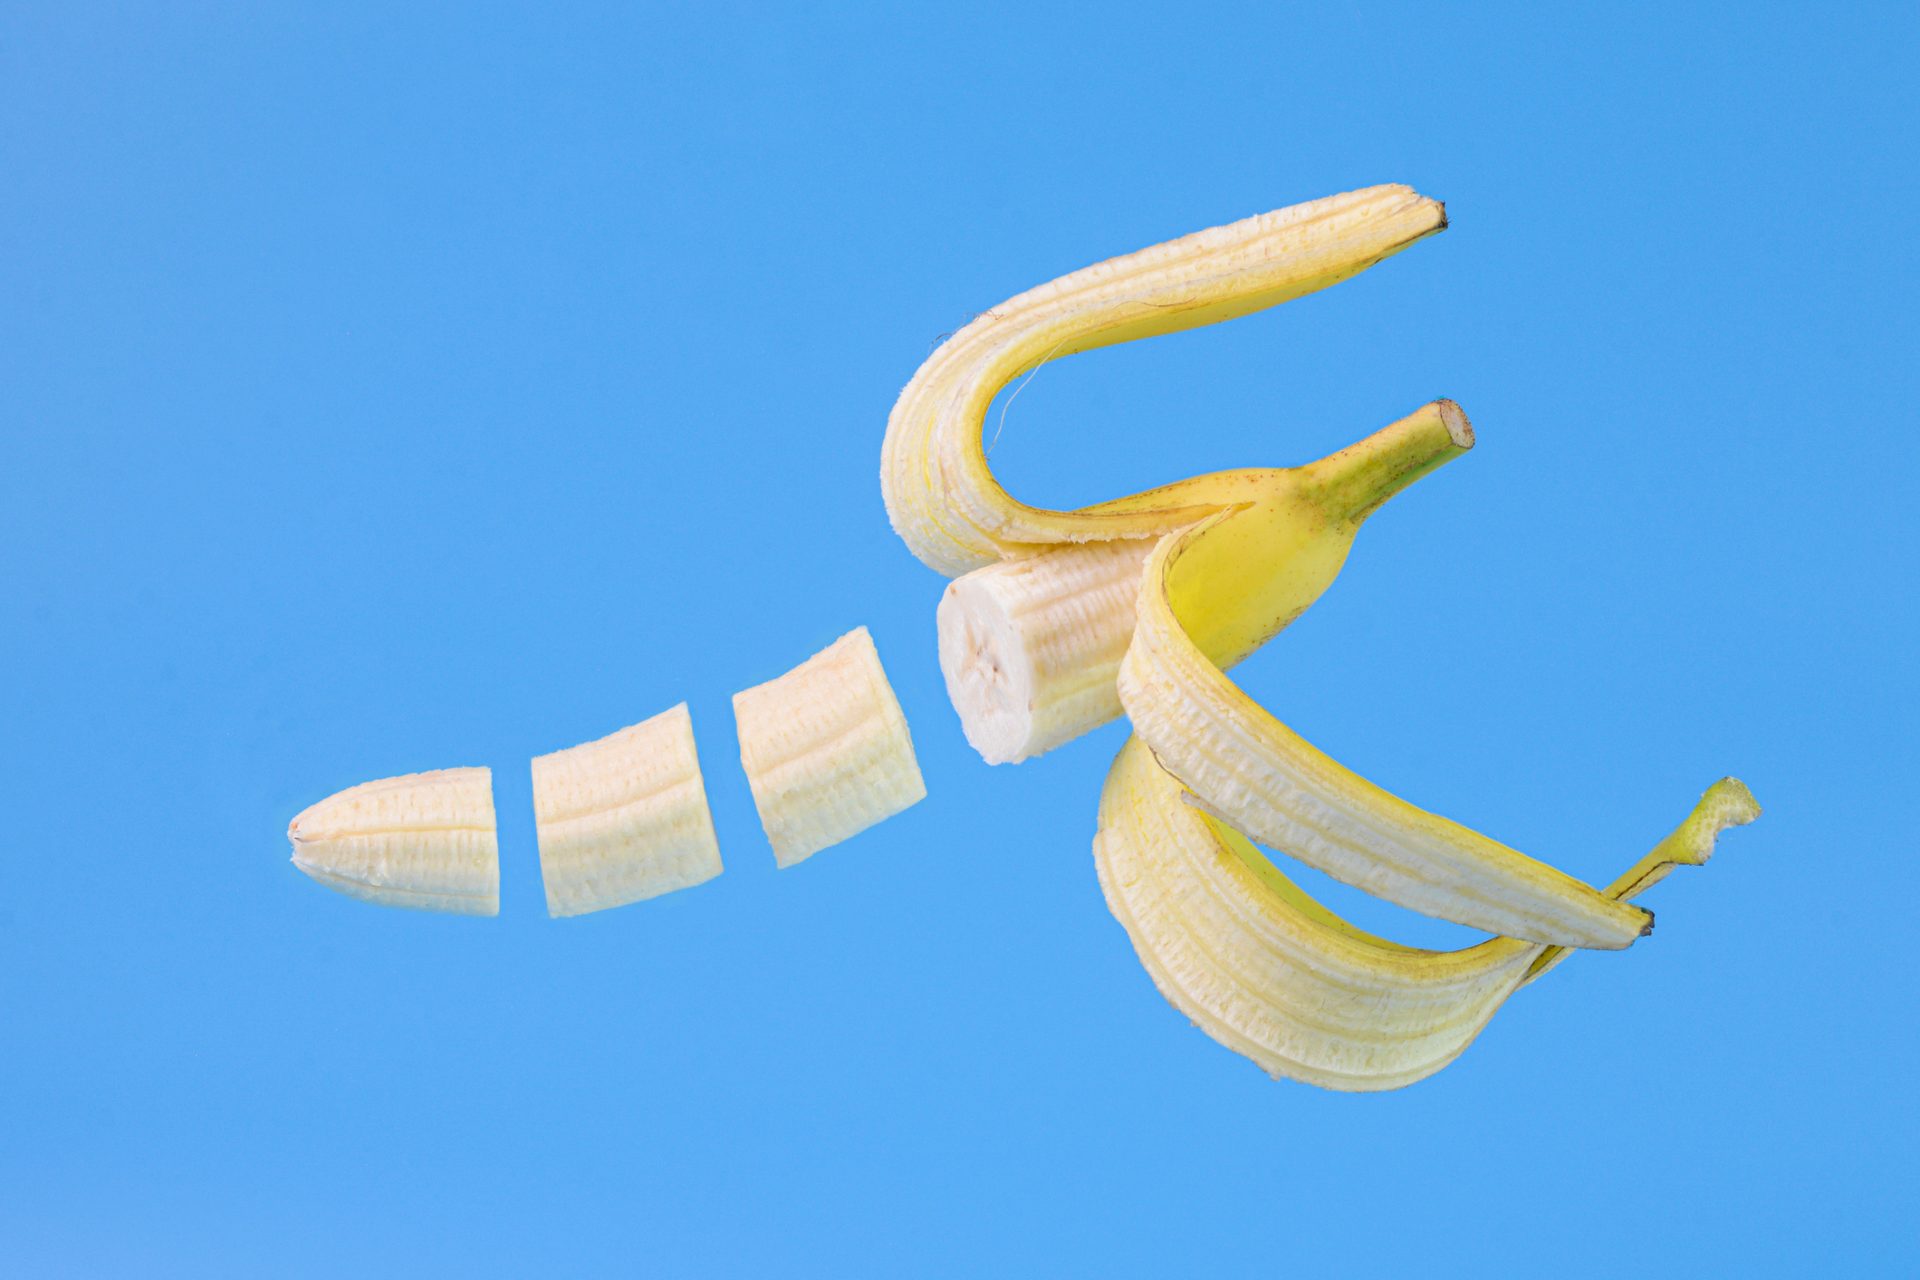 The best banana in the world could soon disappear entirely